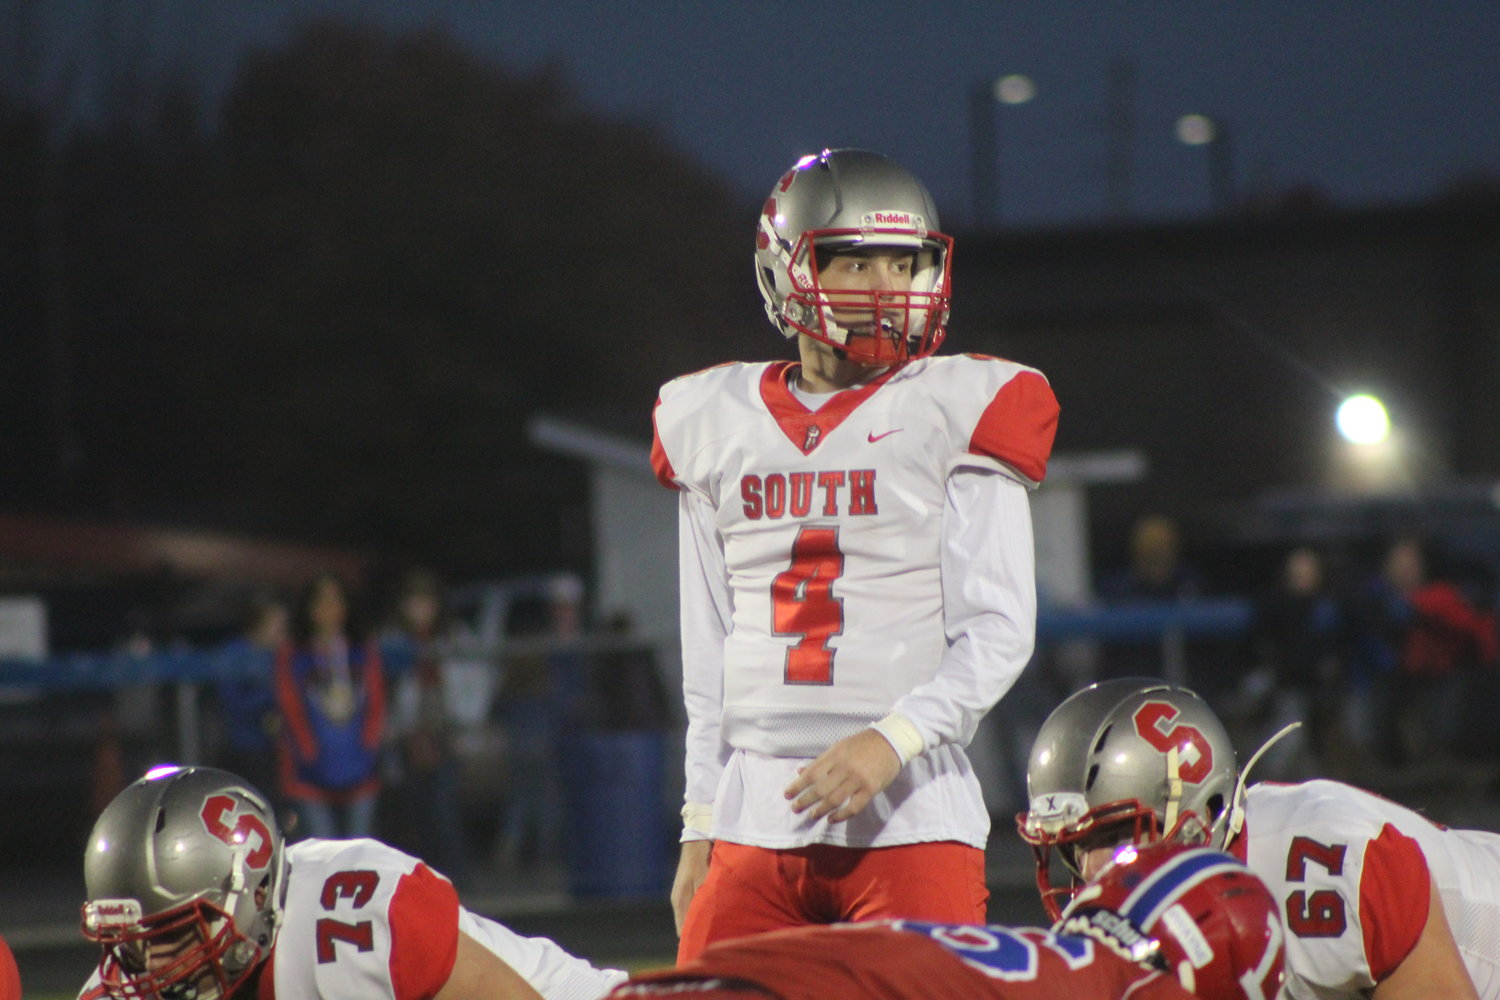 Southmont senior quarterback Nick Scott led the second half comeback for the Mounties on Friday.